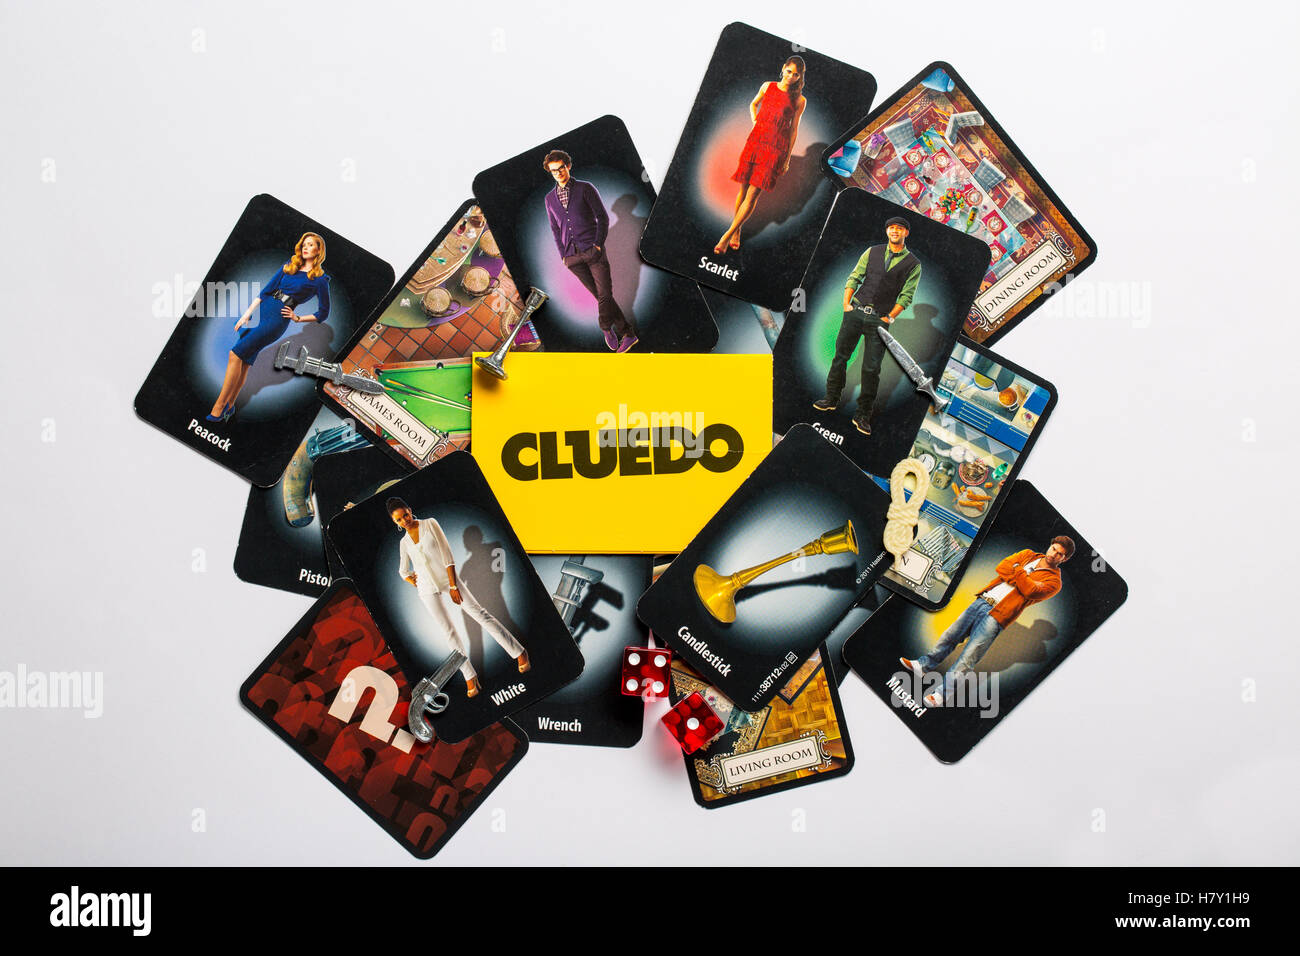 Cluedo board game playing cards Stock Photo